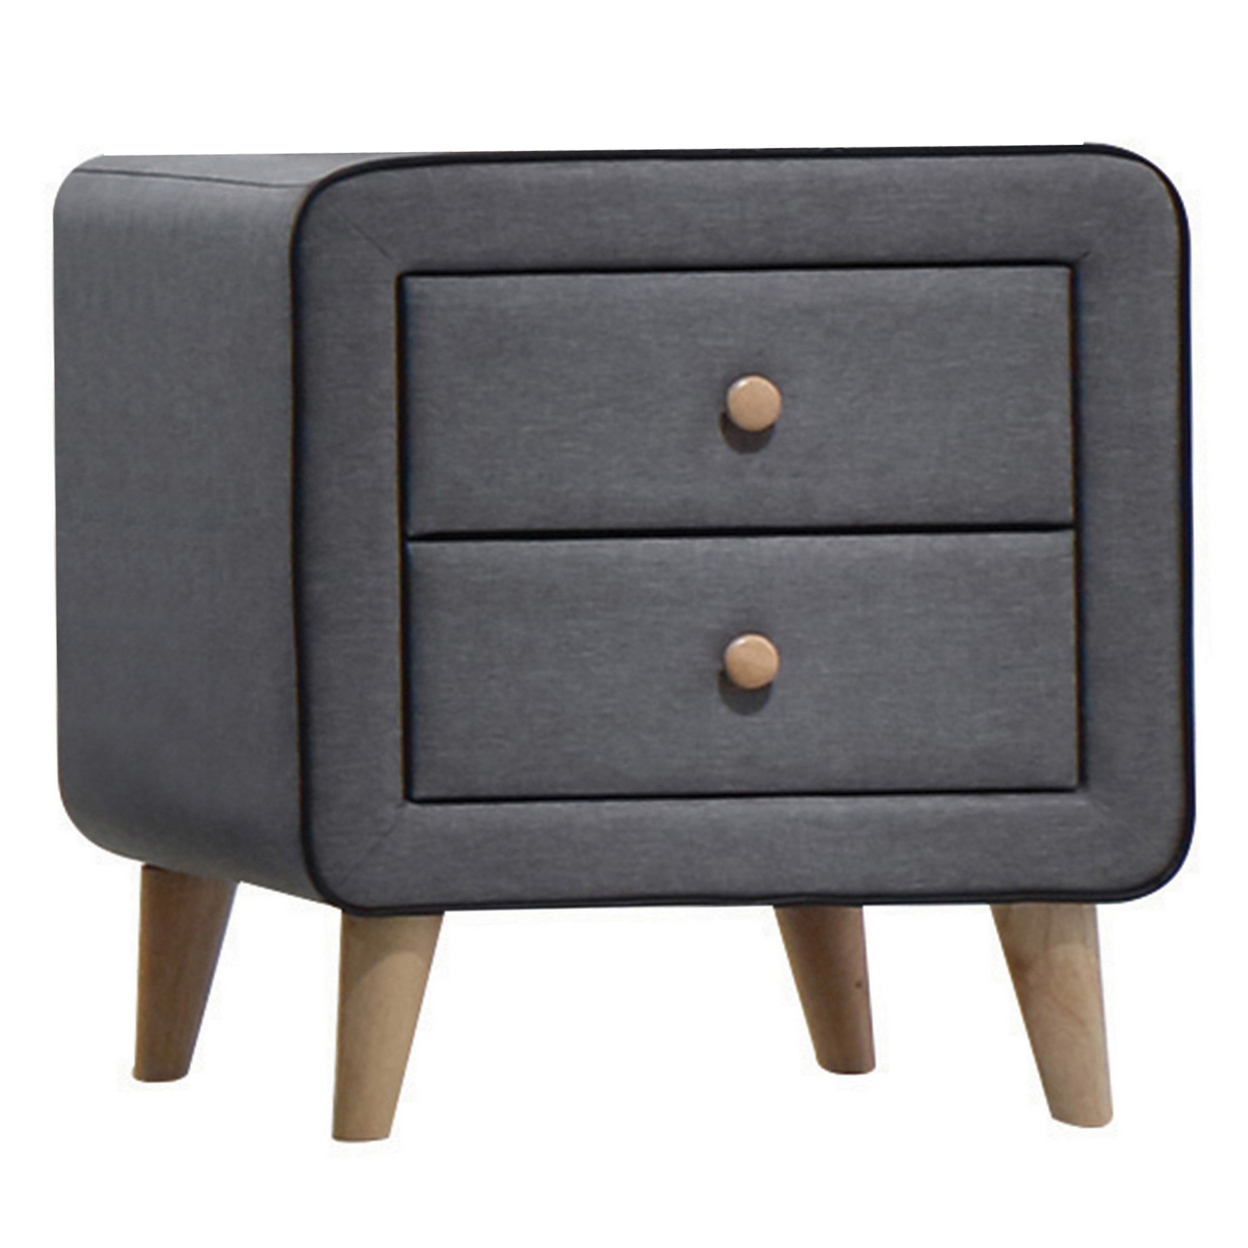 Transitional Style Wood And Fabric Upholstery Nightstand With 2 Drawers, Gray- Saltoro Sherpi